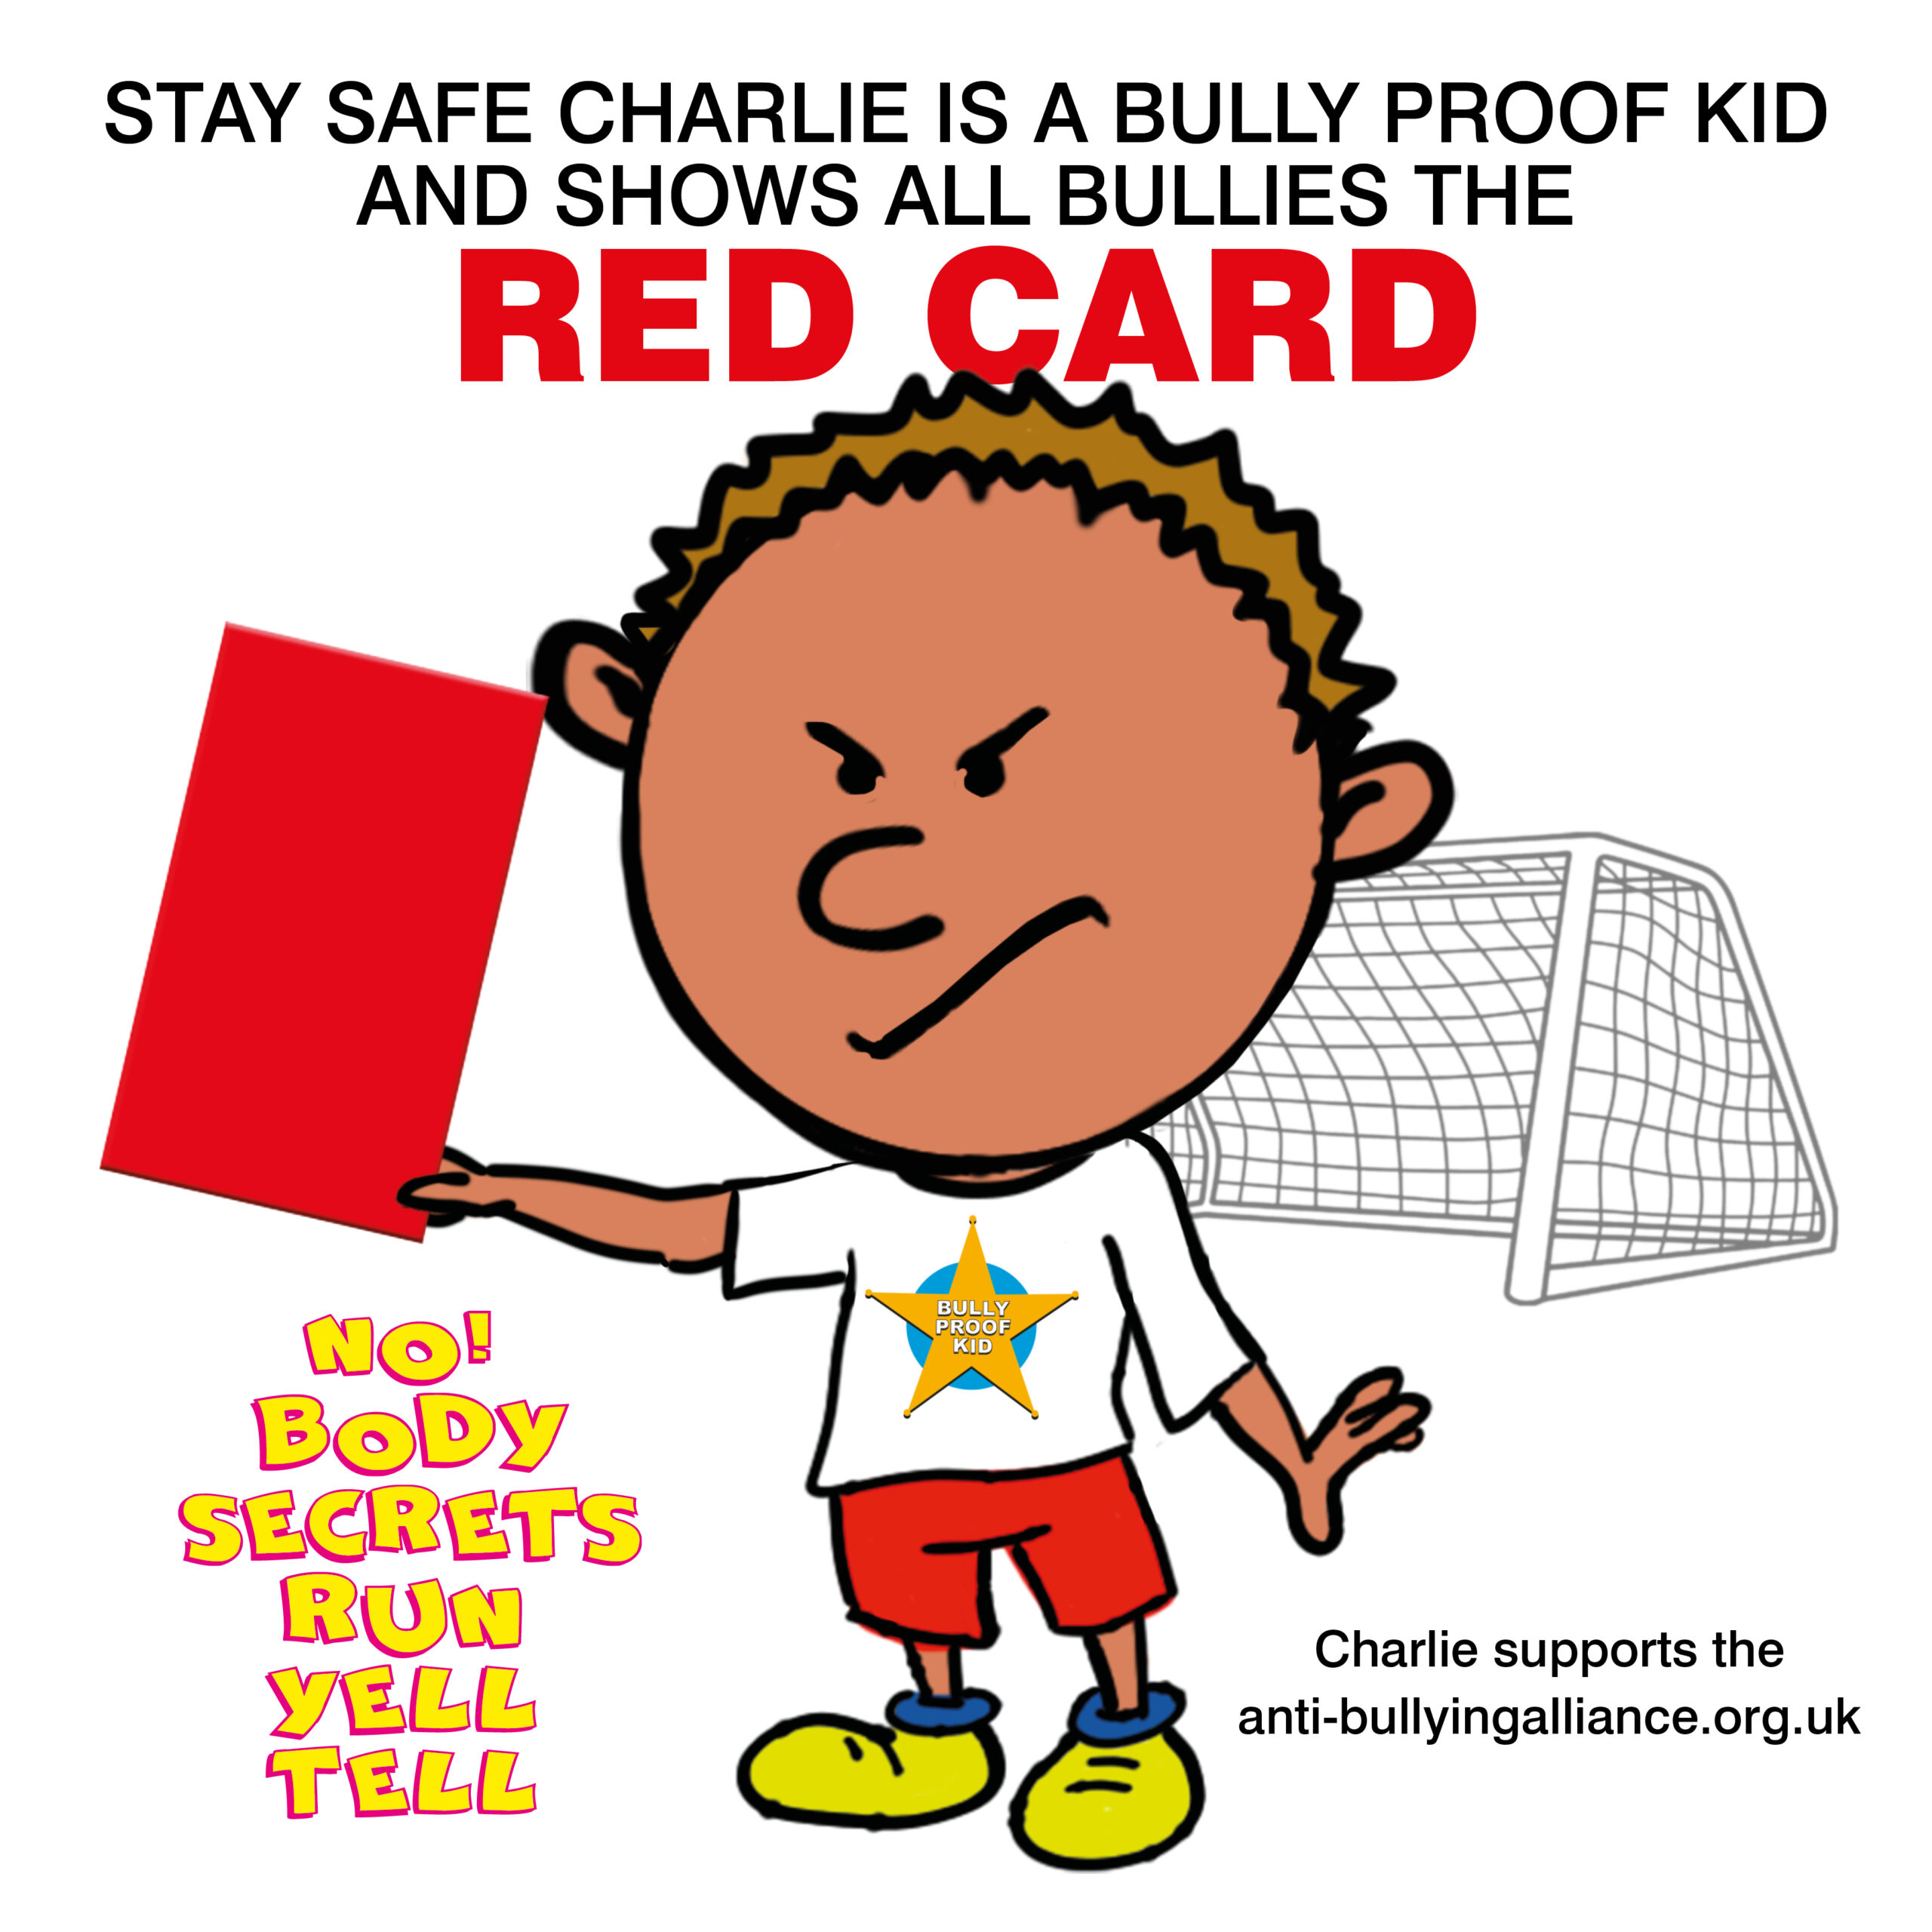 Stay Safe Charlie shows bullies the red card